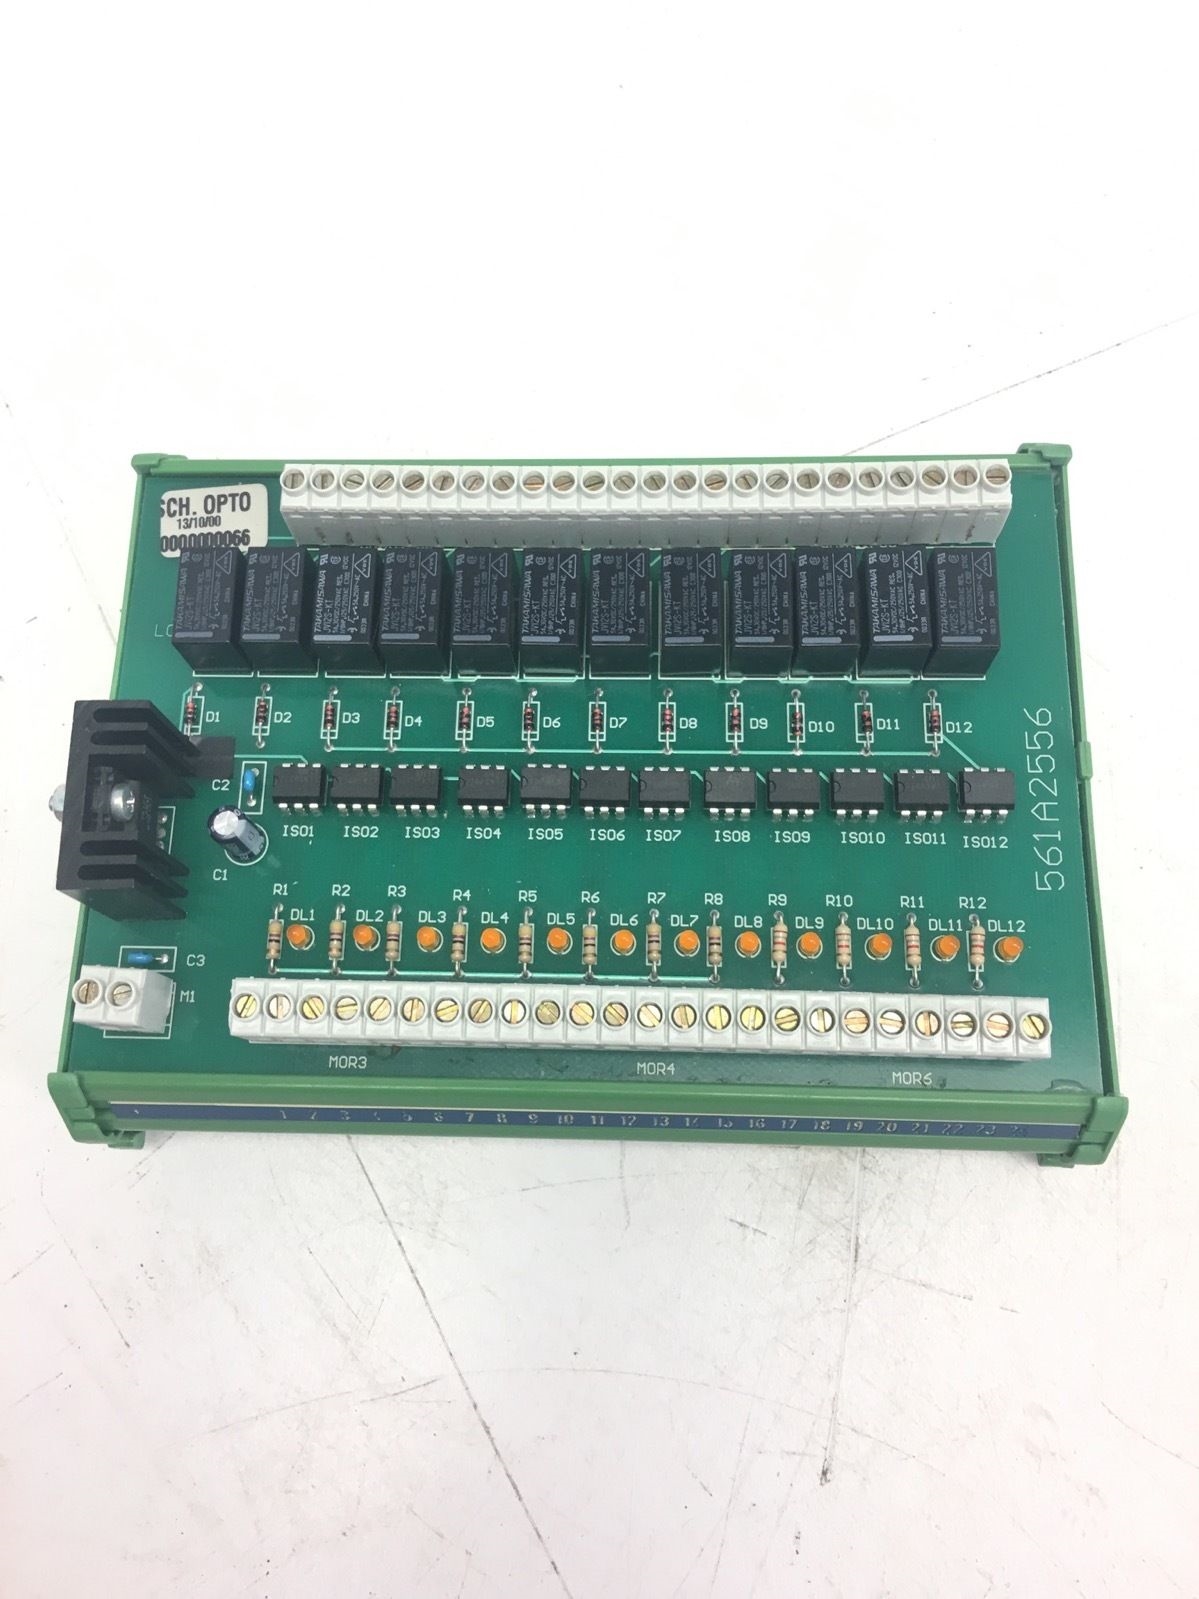 NEW SCH OPTO 561A2556 PC CIRCUIT CARD BOARD RELAY, FAST SHIPPING, (B273) 1